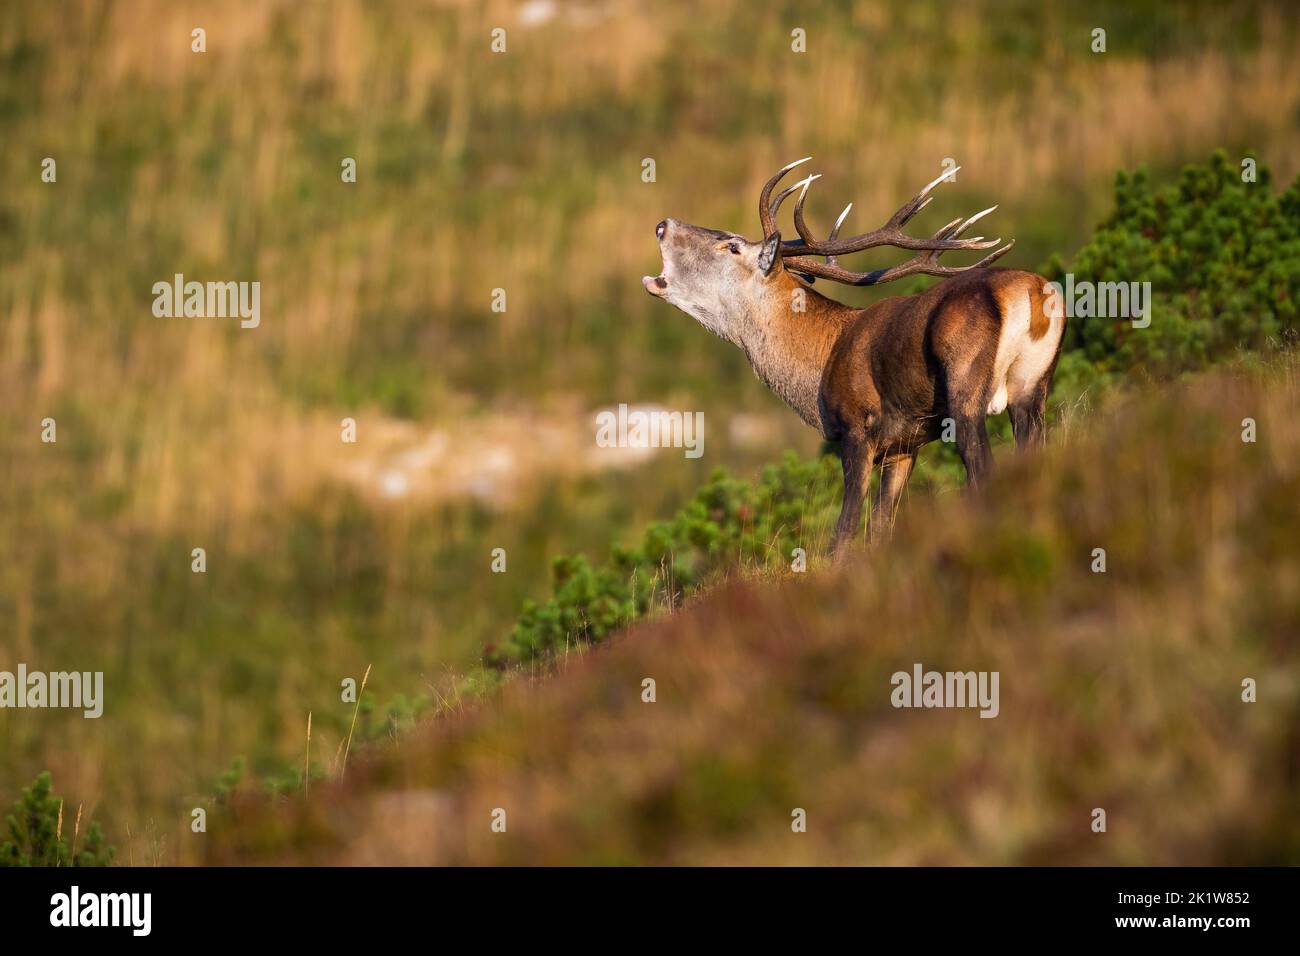 Red deer, cervus elaphus, roaring in the moddle of dwarf pine in autumn. Stag bellowing on mountains in fall. Wild male mammal calling on mountainside Stock Photo